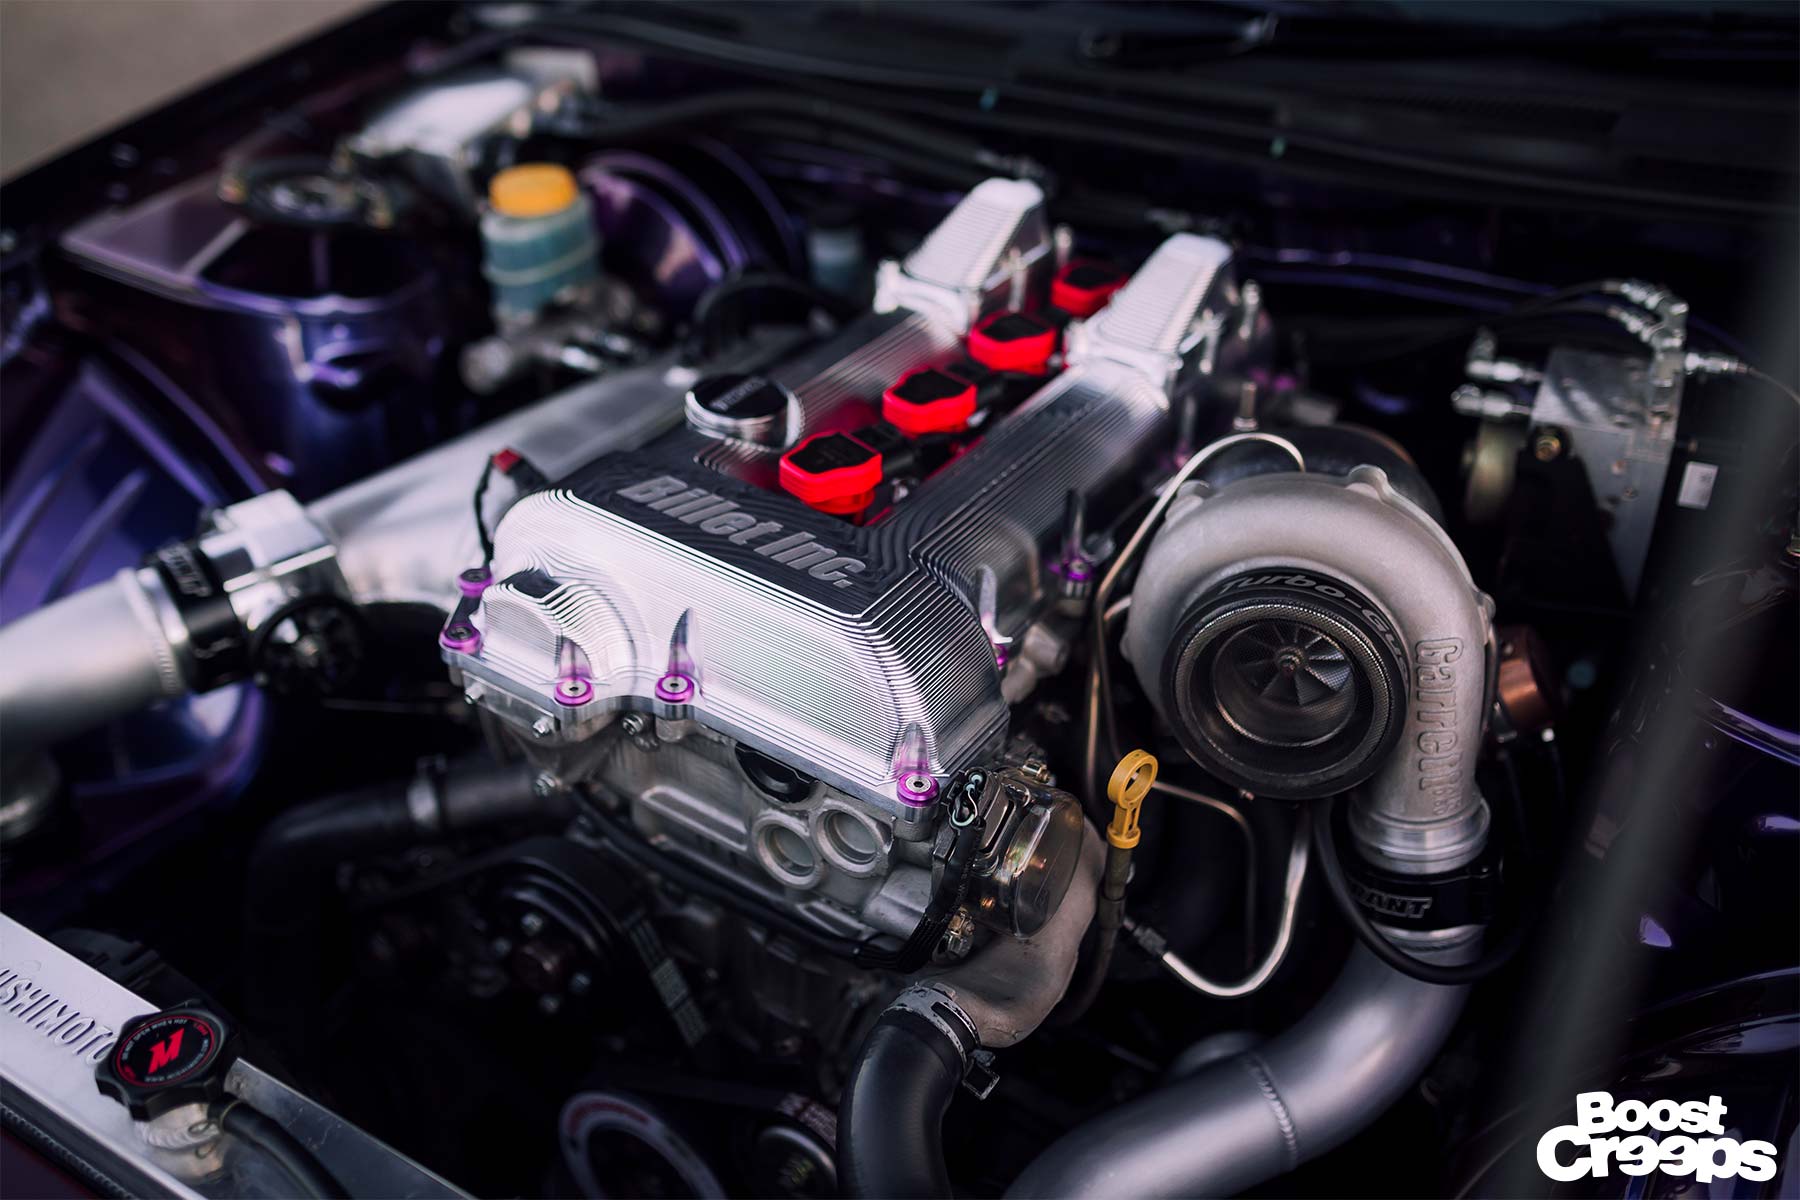 Midnight Purple 3 200SX S15 engine bay, showing billet engine cover and high mount turbo